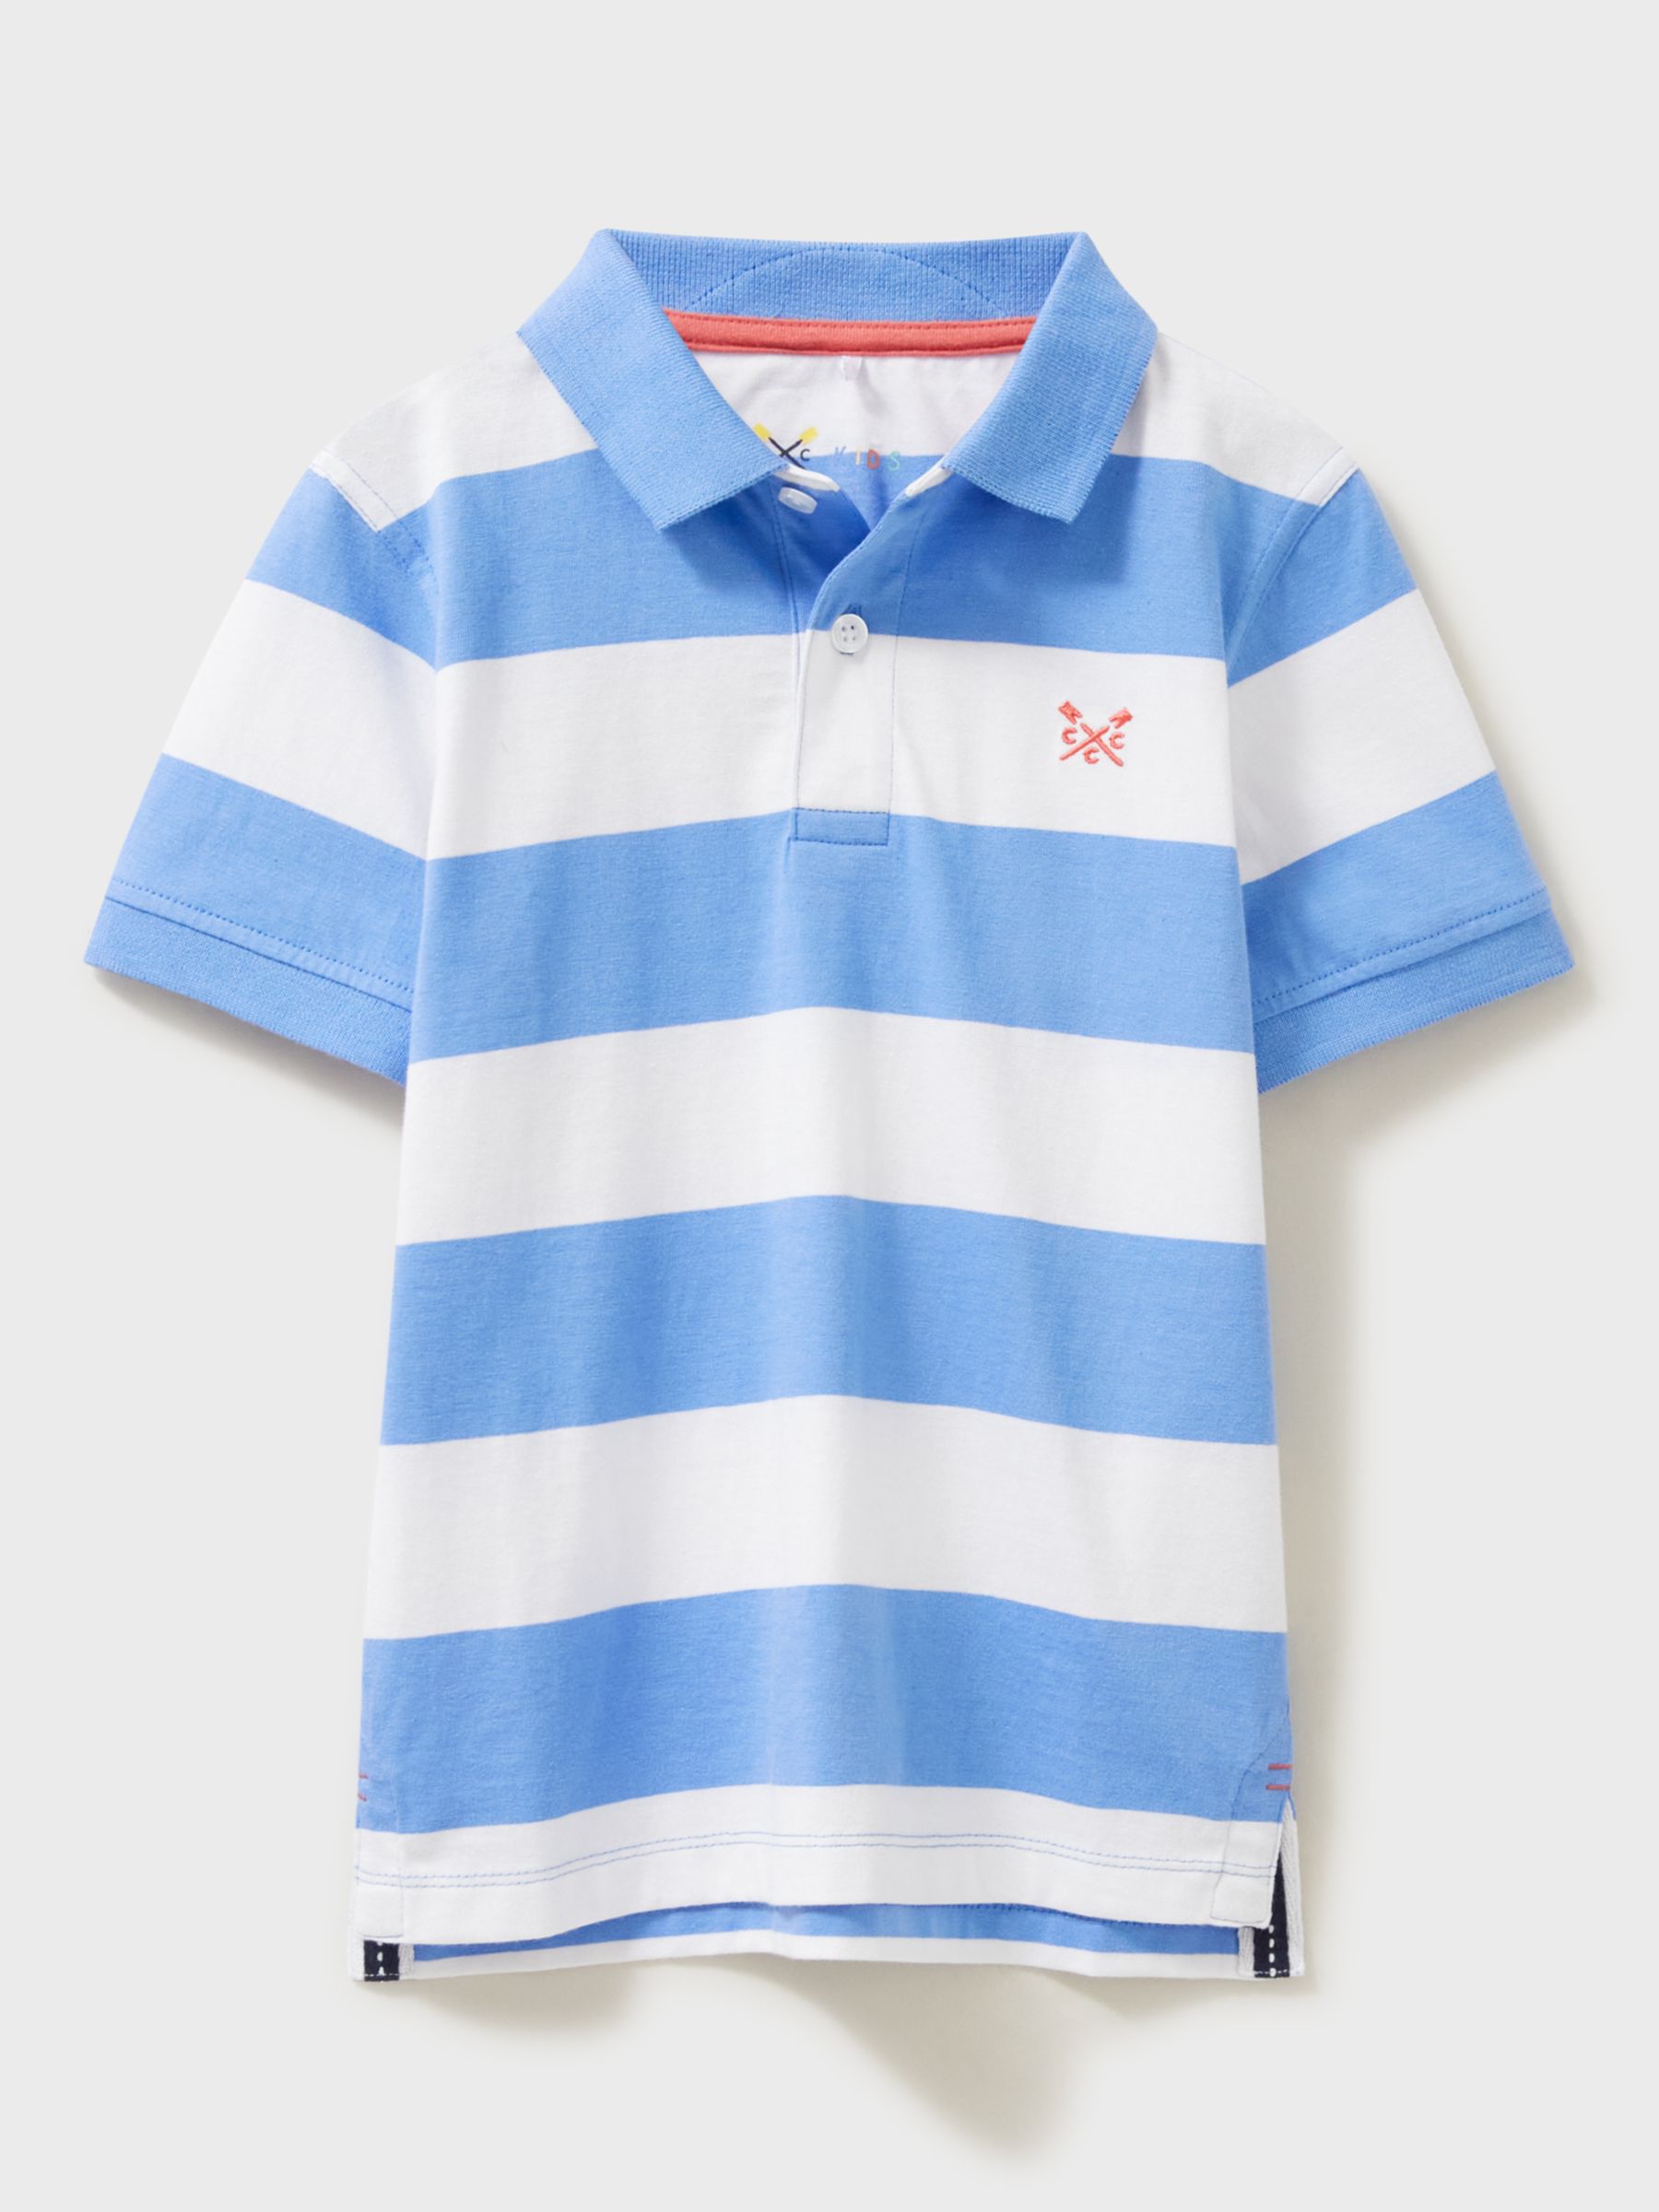 Crew Clothing Kids' Short Sleeve Striped Pique Polo Shirt, Blue/White, 8-9 years